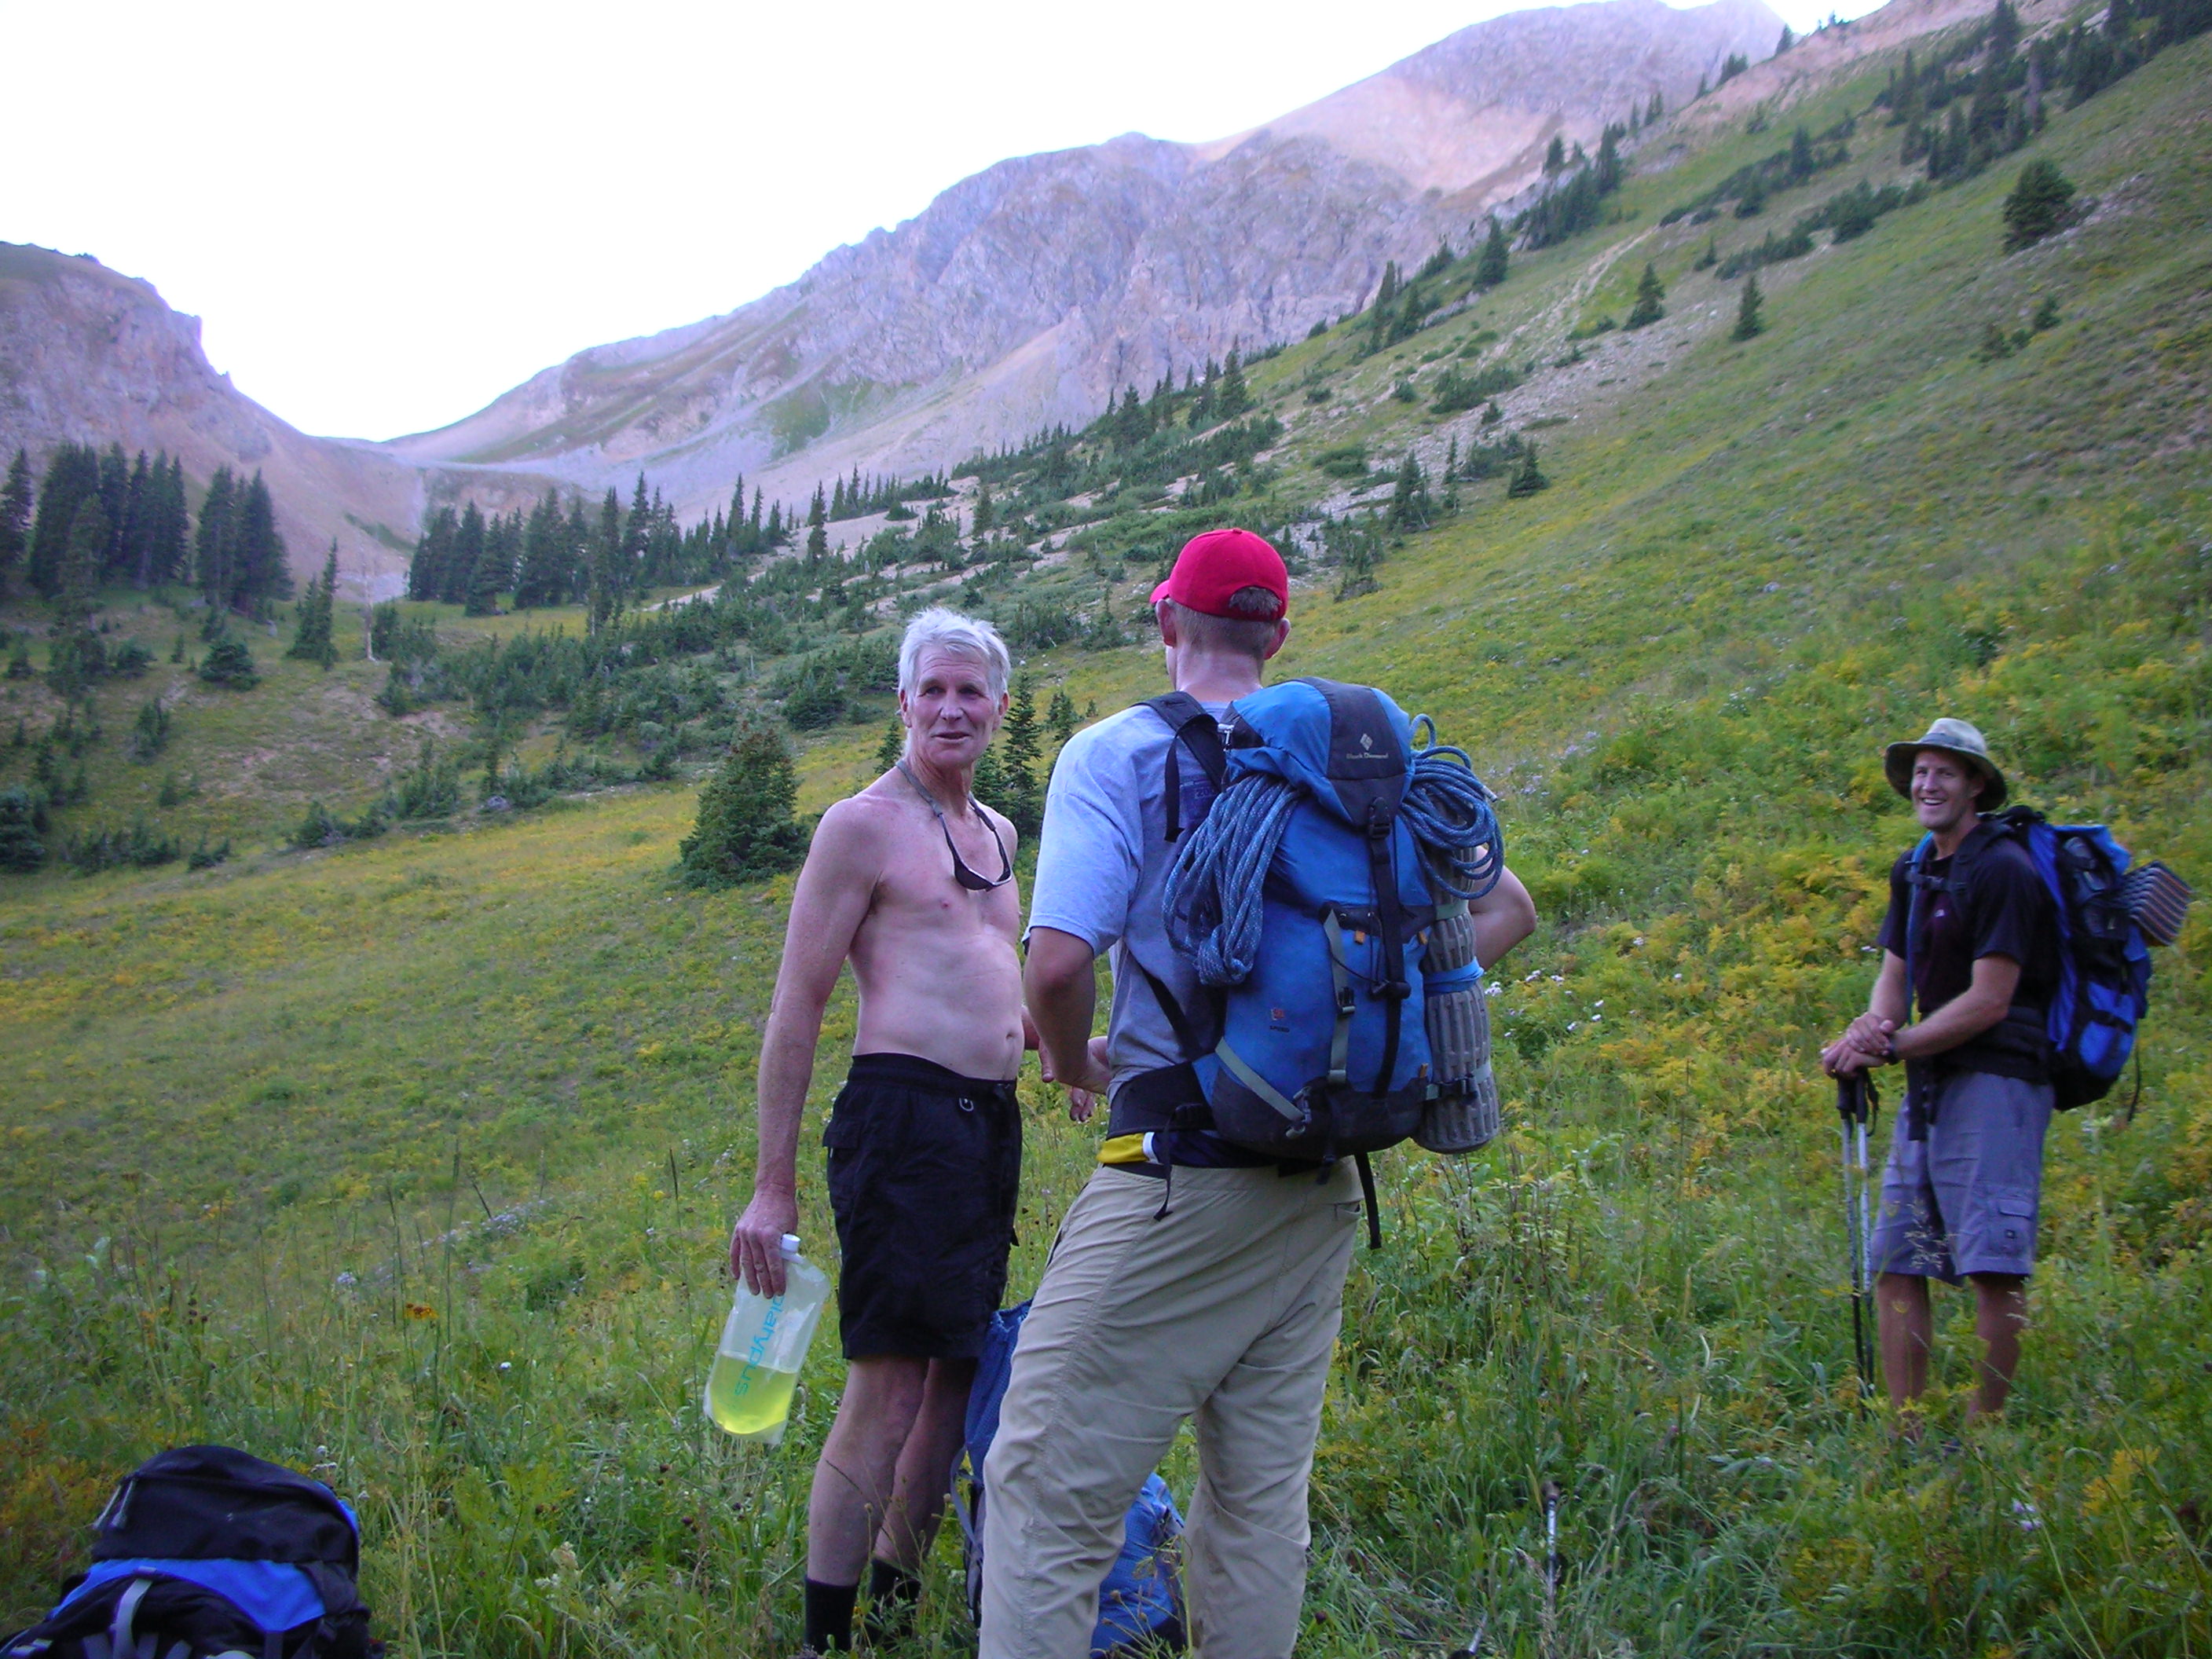 Randy Udall on a hike on Capitol Peak near Carbondale, Colo., his home town. Photo: Chris Tomer